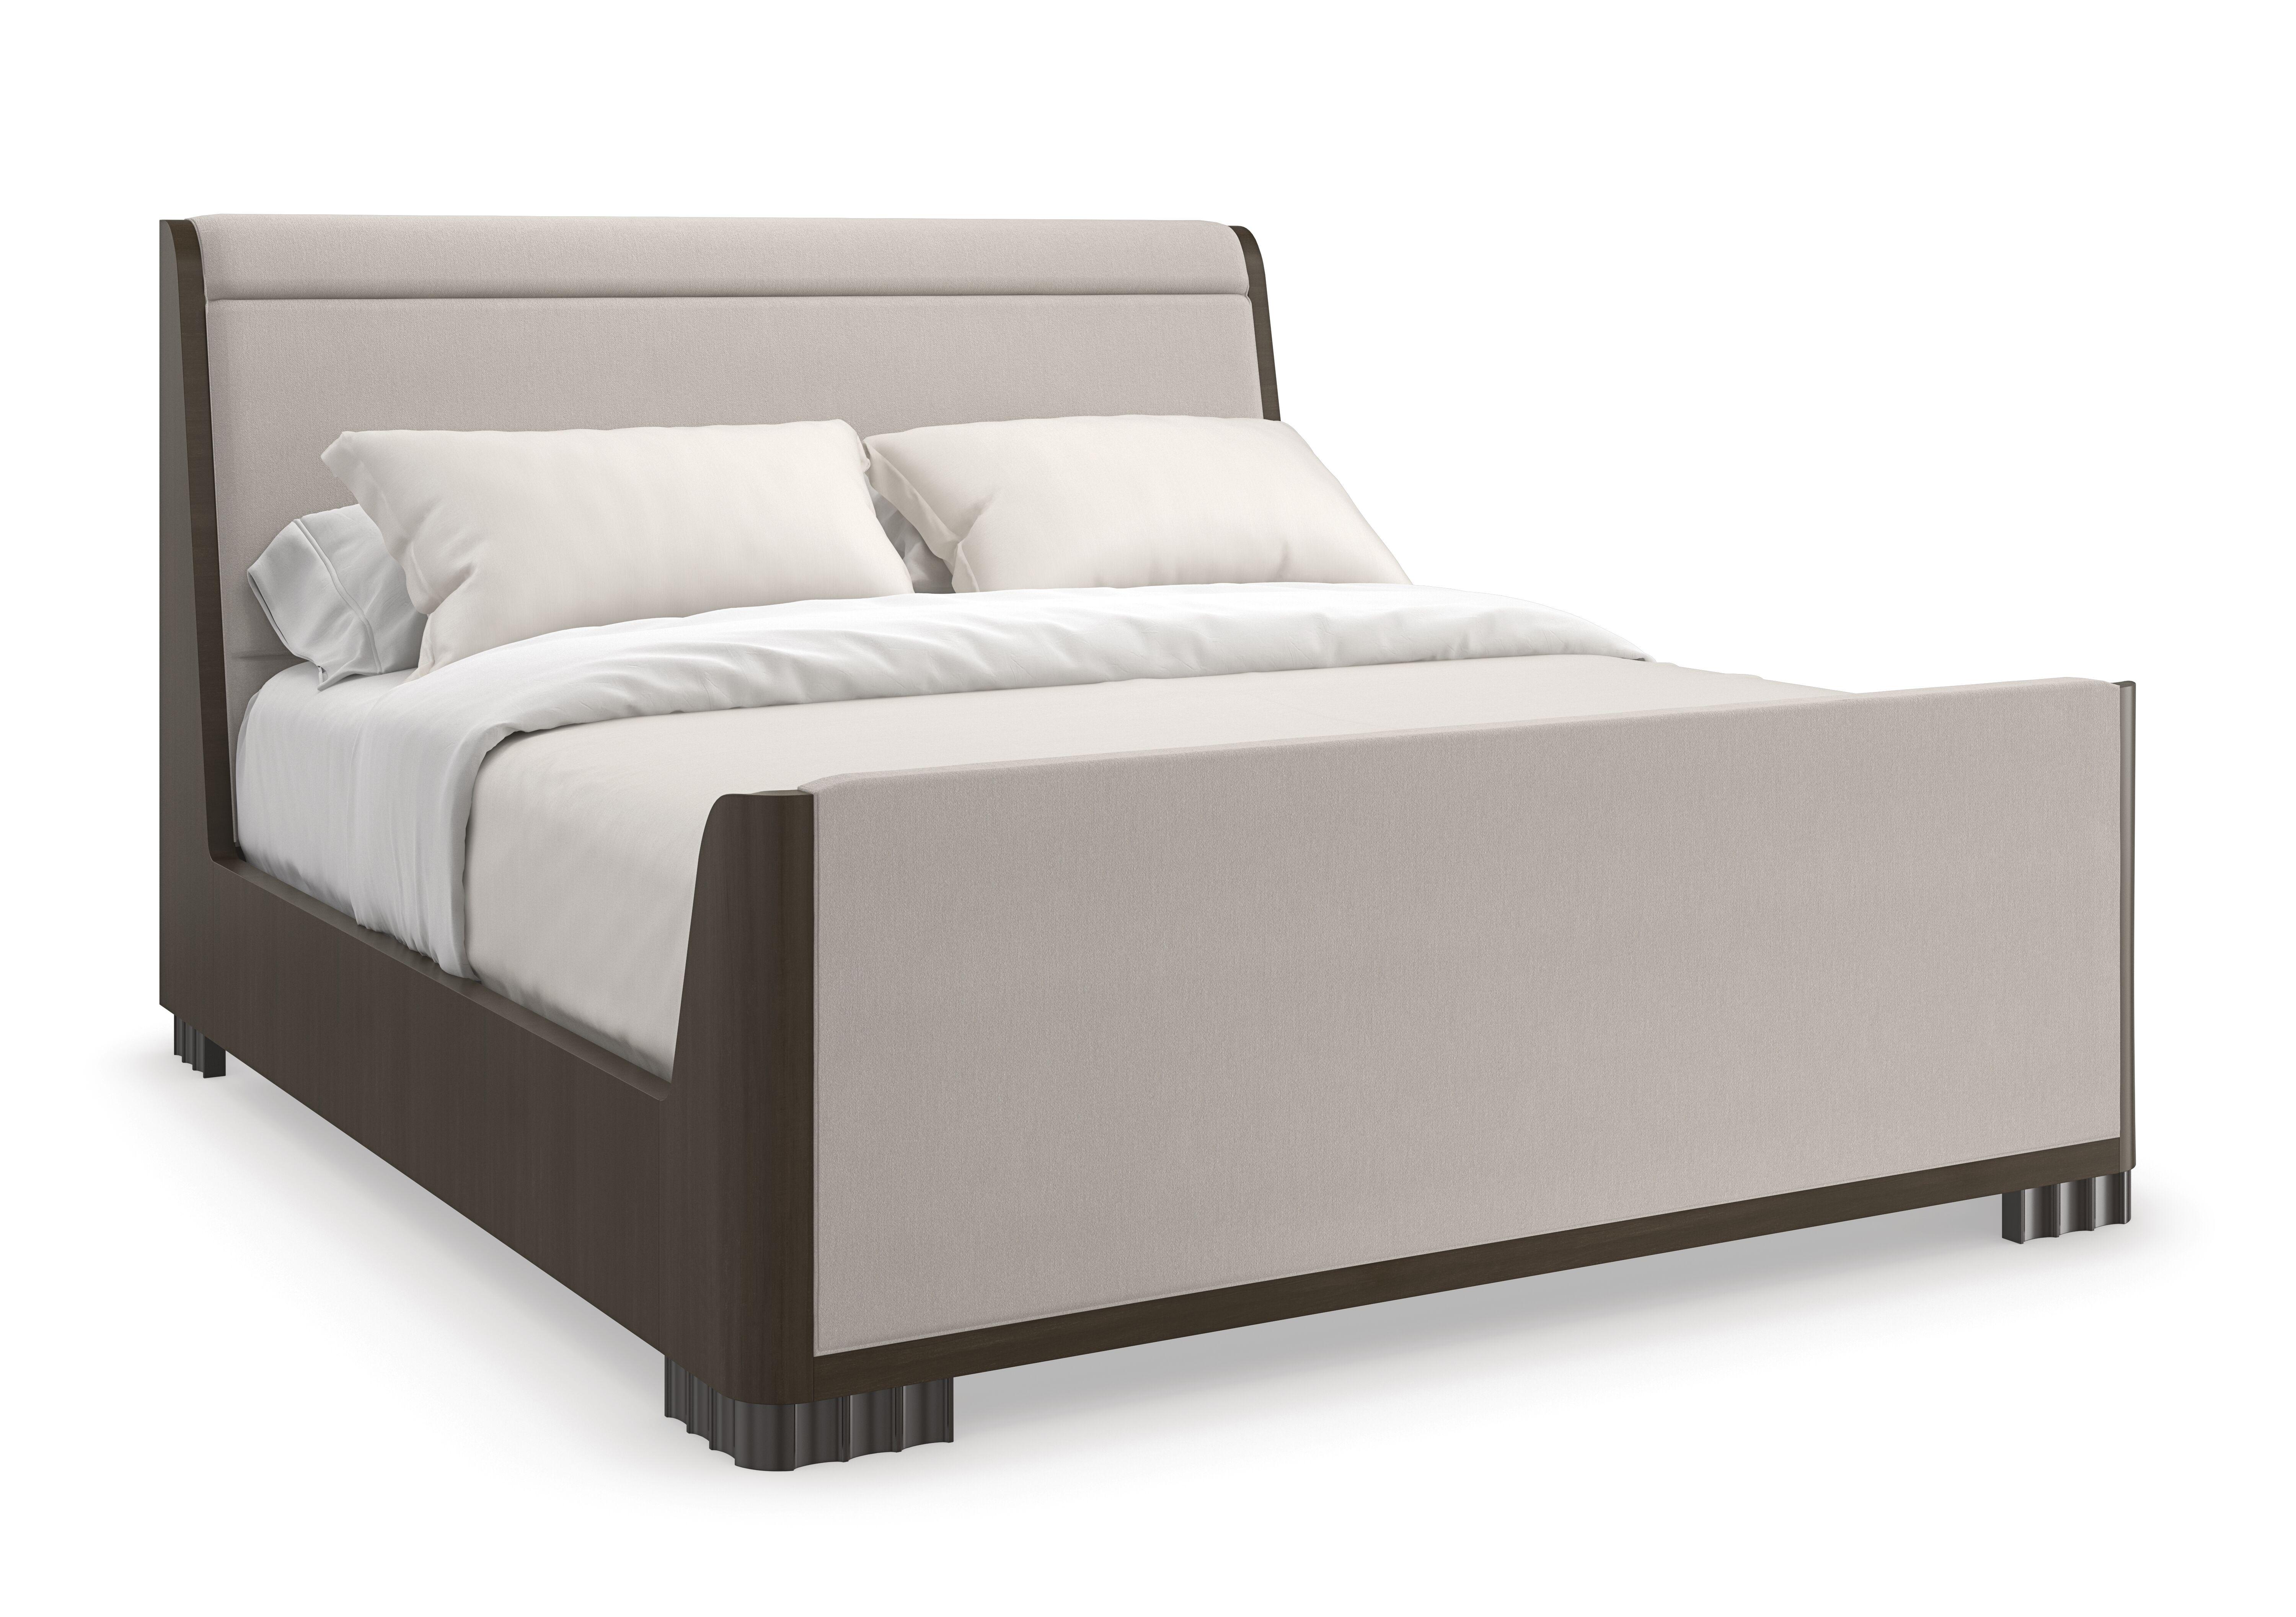 Contemporary Sleigh Bed SLOW WAVE CLA-423-103 in Light Gray, Dark Chocolate Fabric